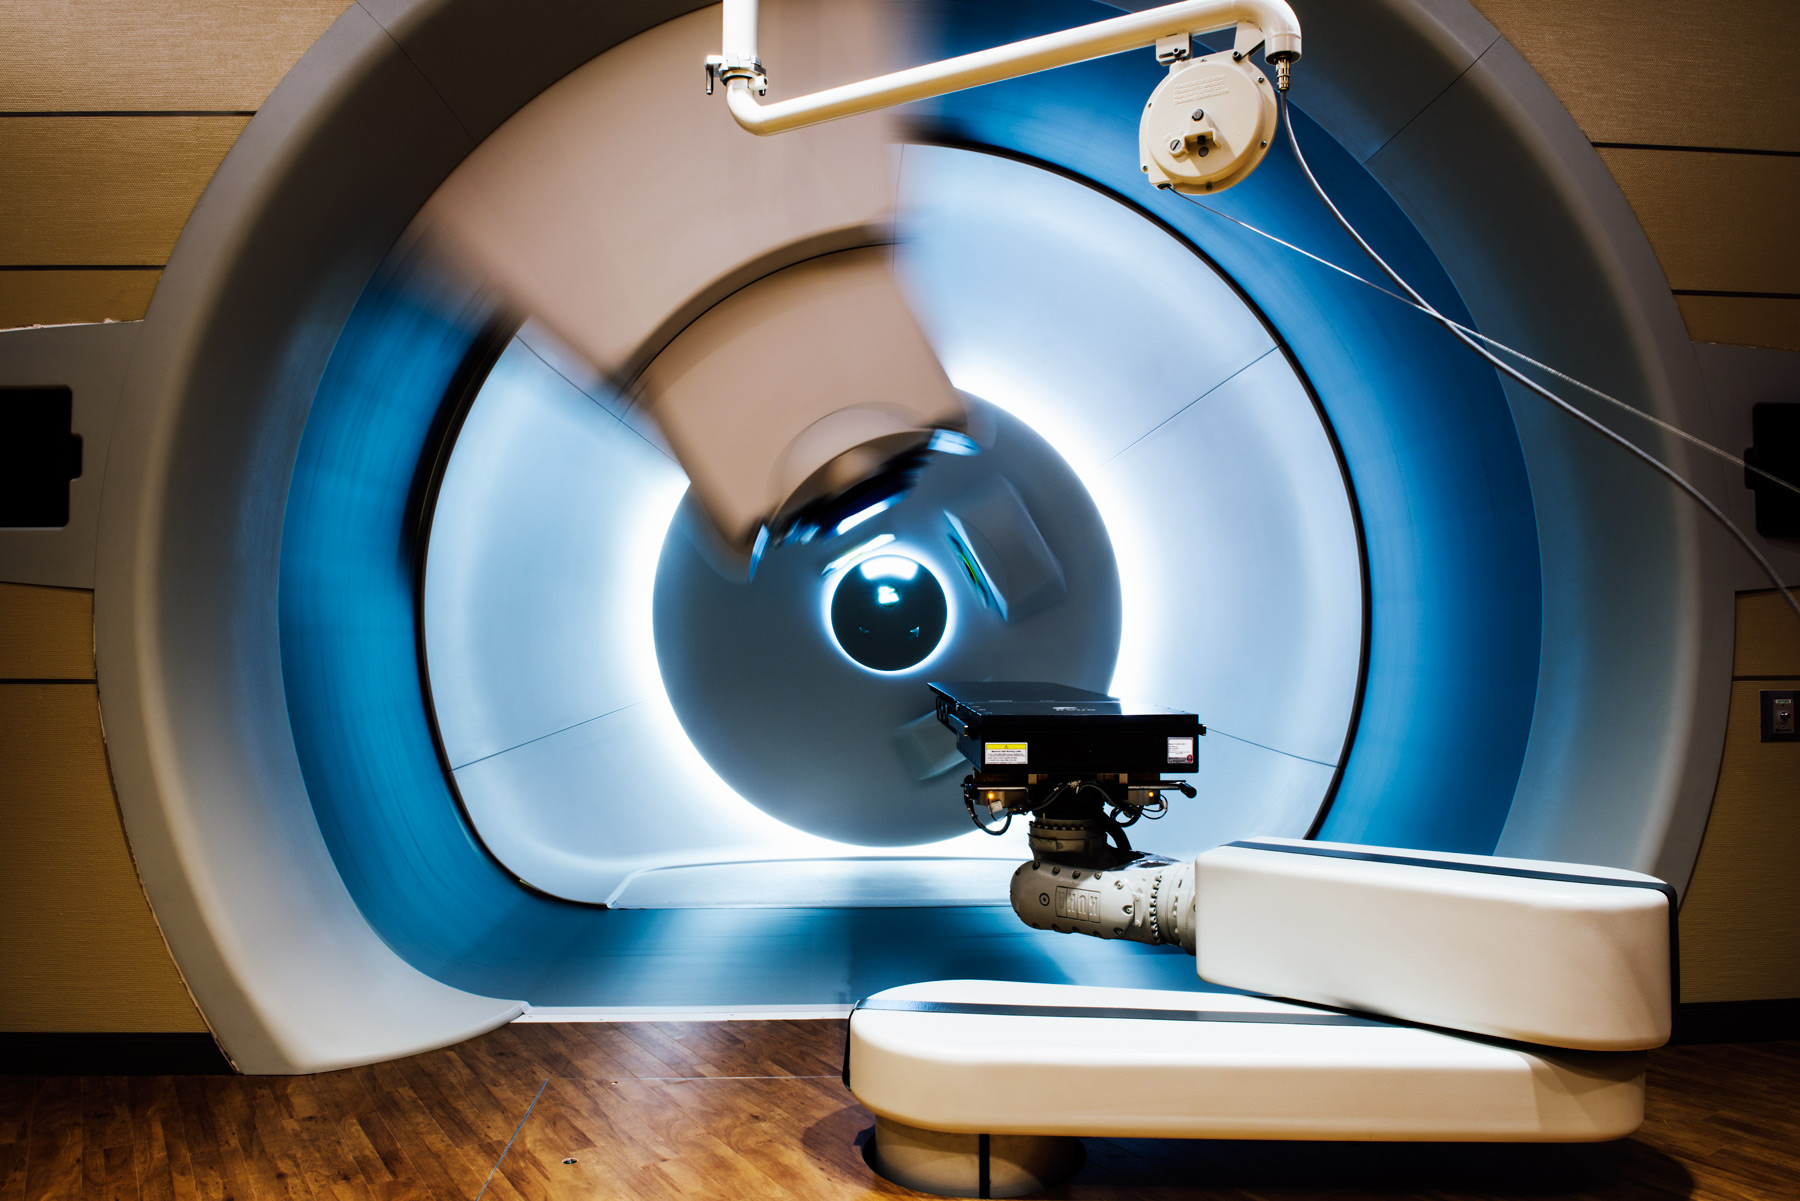 Revolutionizing Cancer Treatment: Proton Therapy Market Expected to Reach US$ 2,763.2 Million by 2023